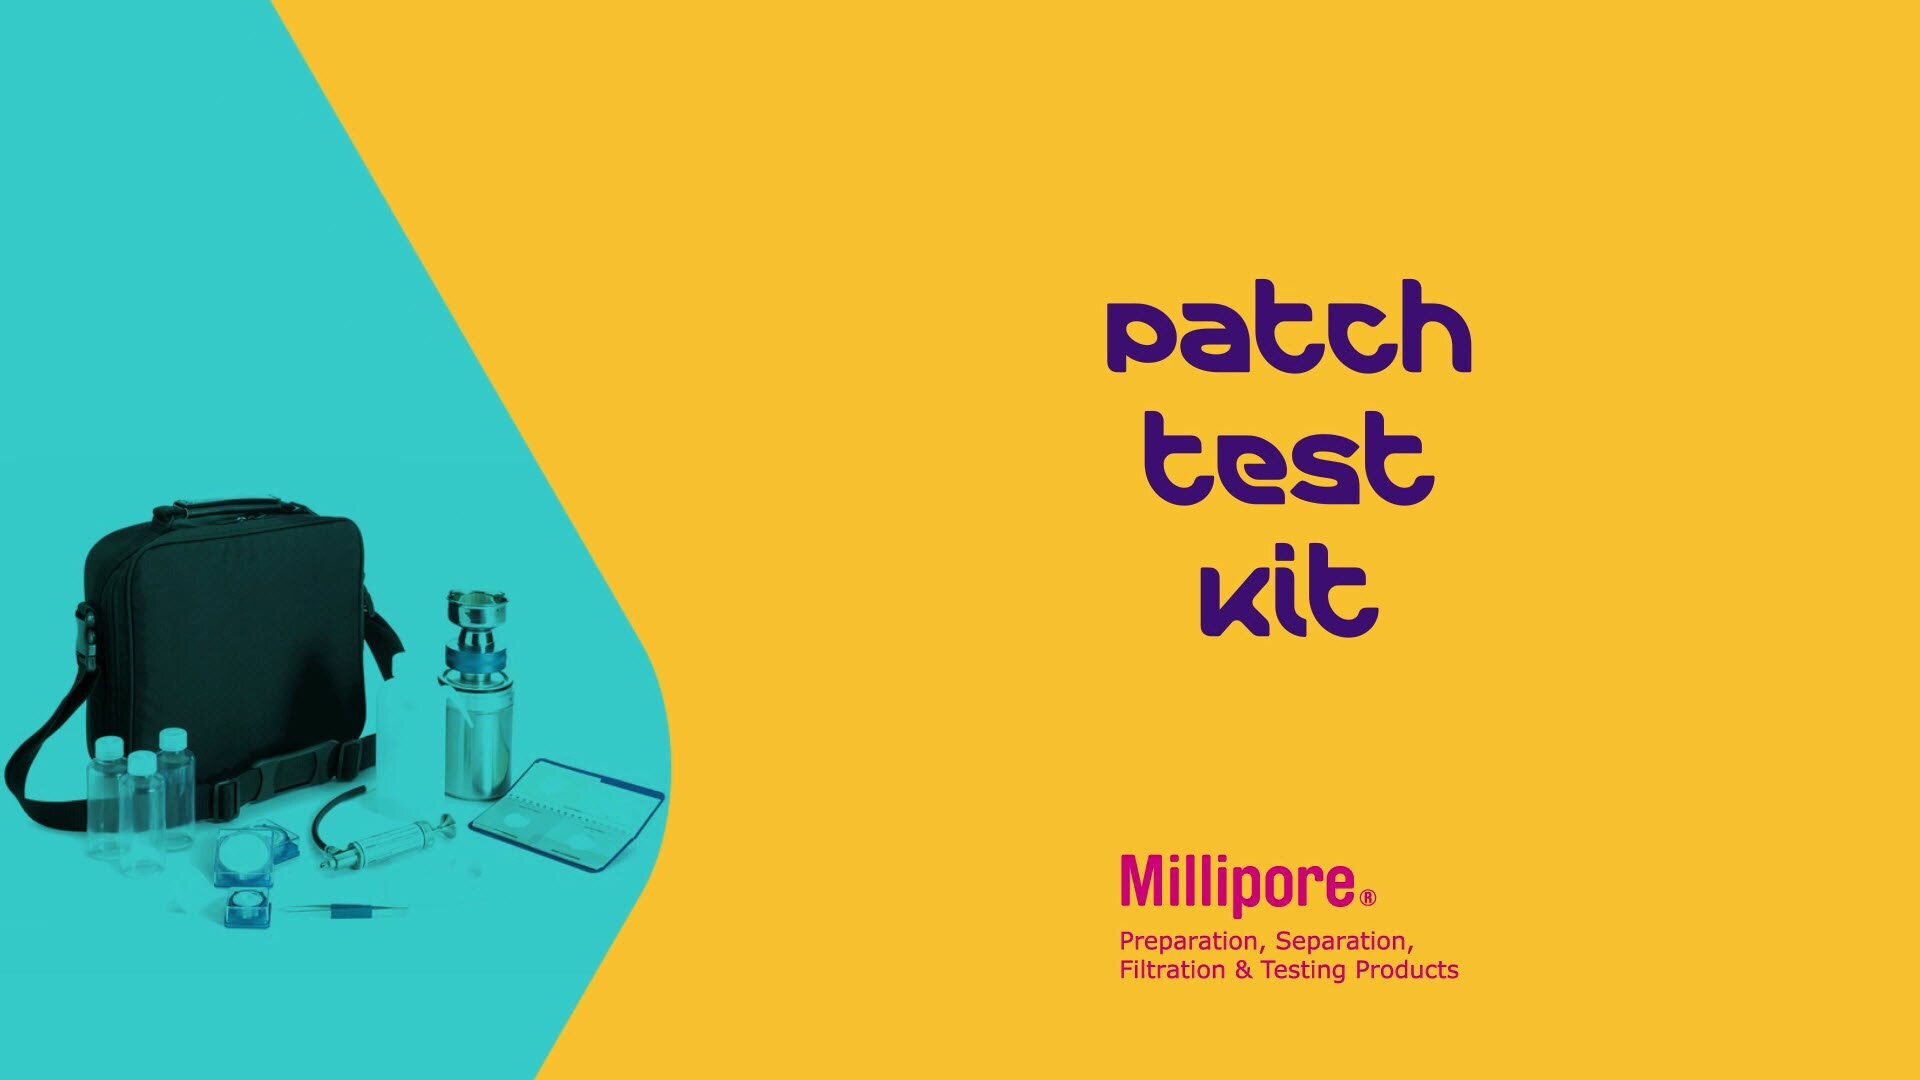 Field-Based Sampling and Contamination Analysis with Millipore<sup>®</sup> Patch Test Kit